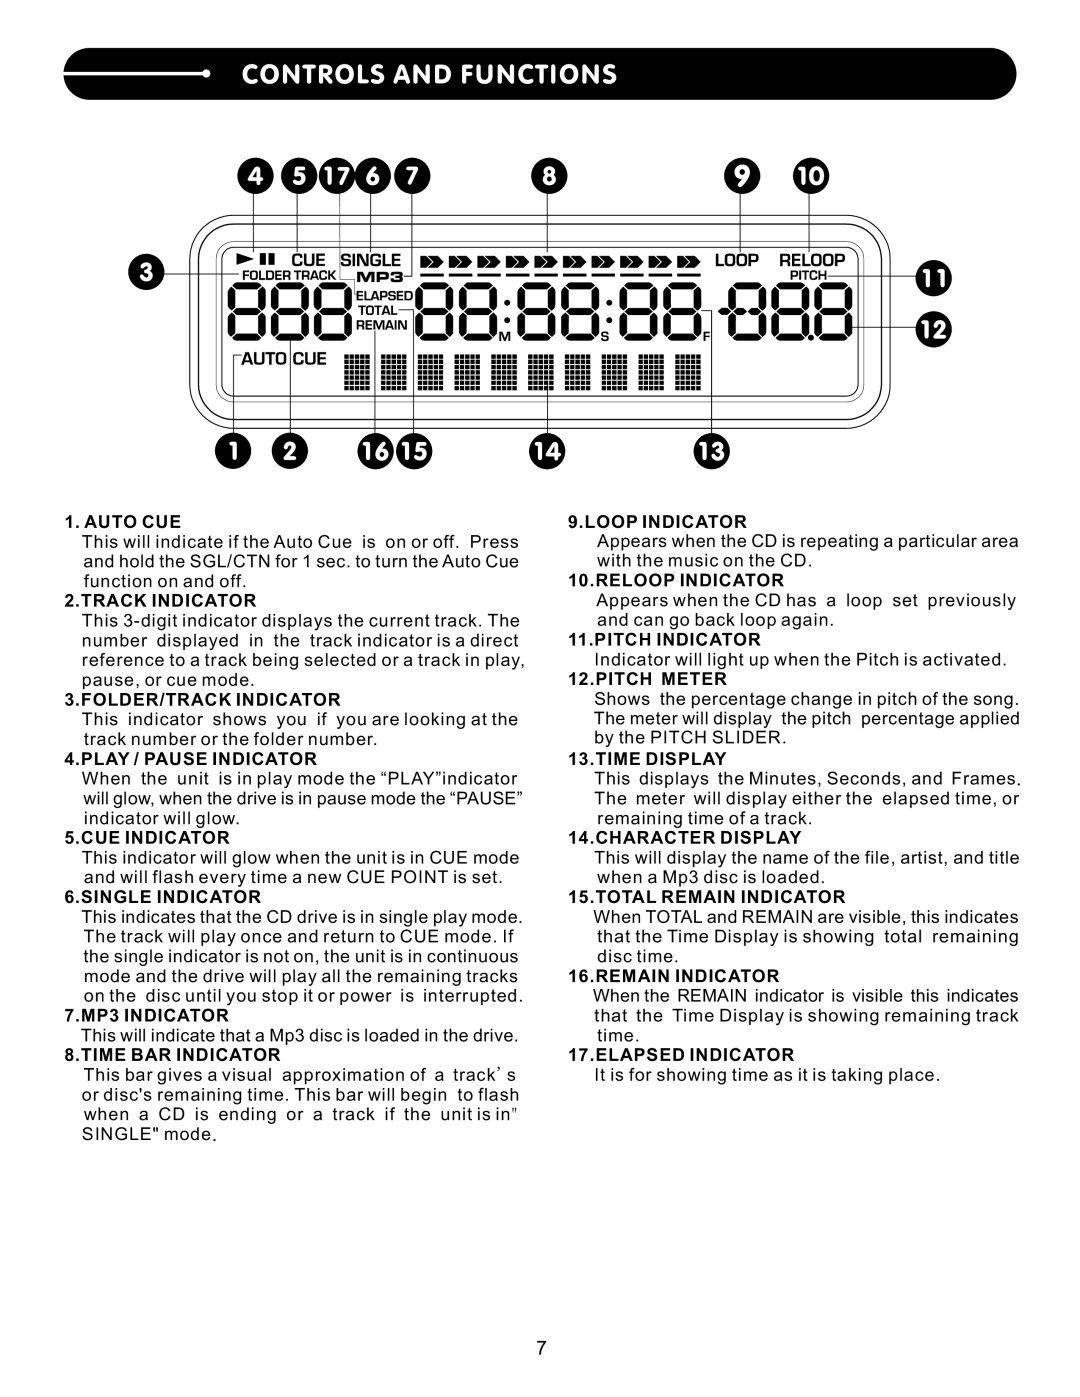 Stanton C.502 user manual Controls And Functions 